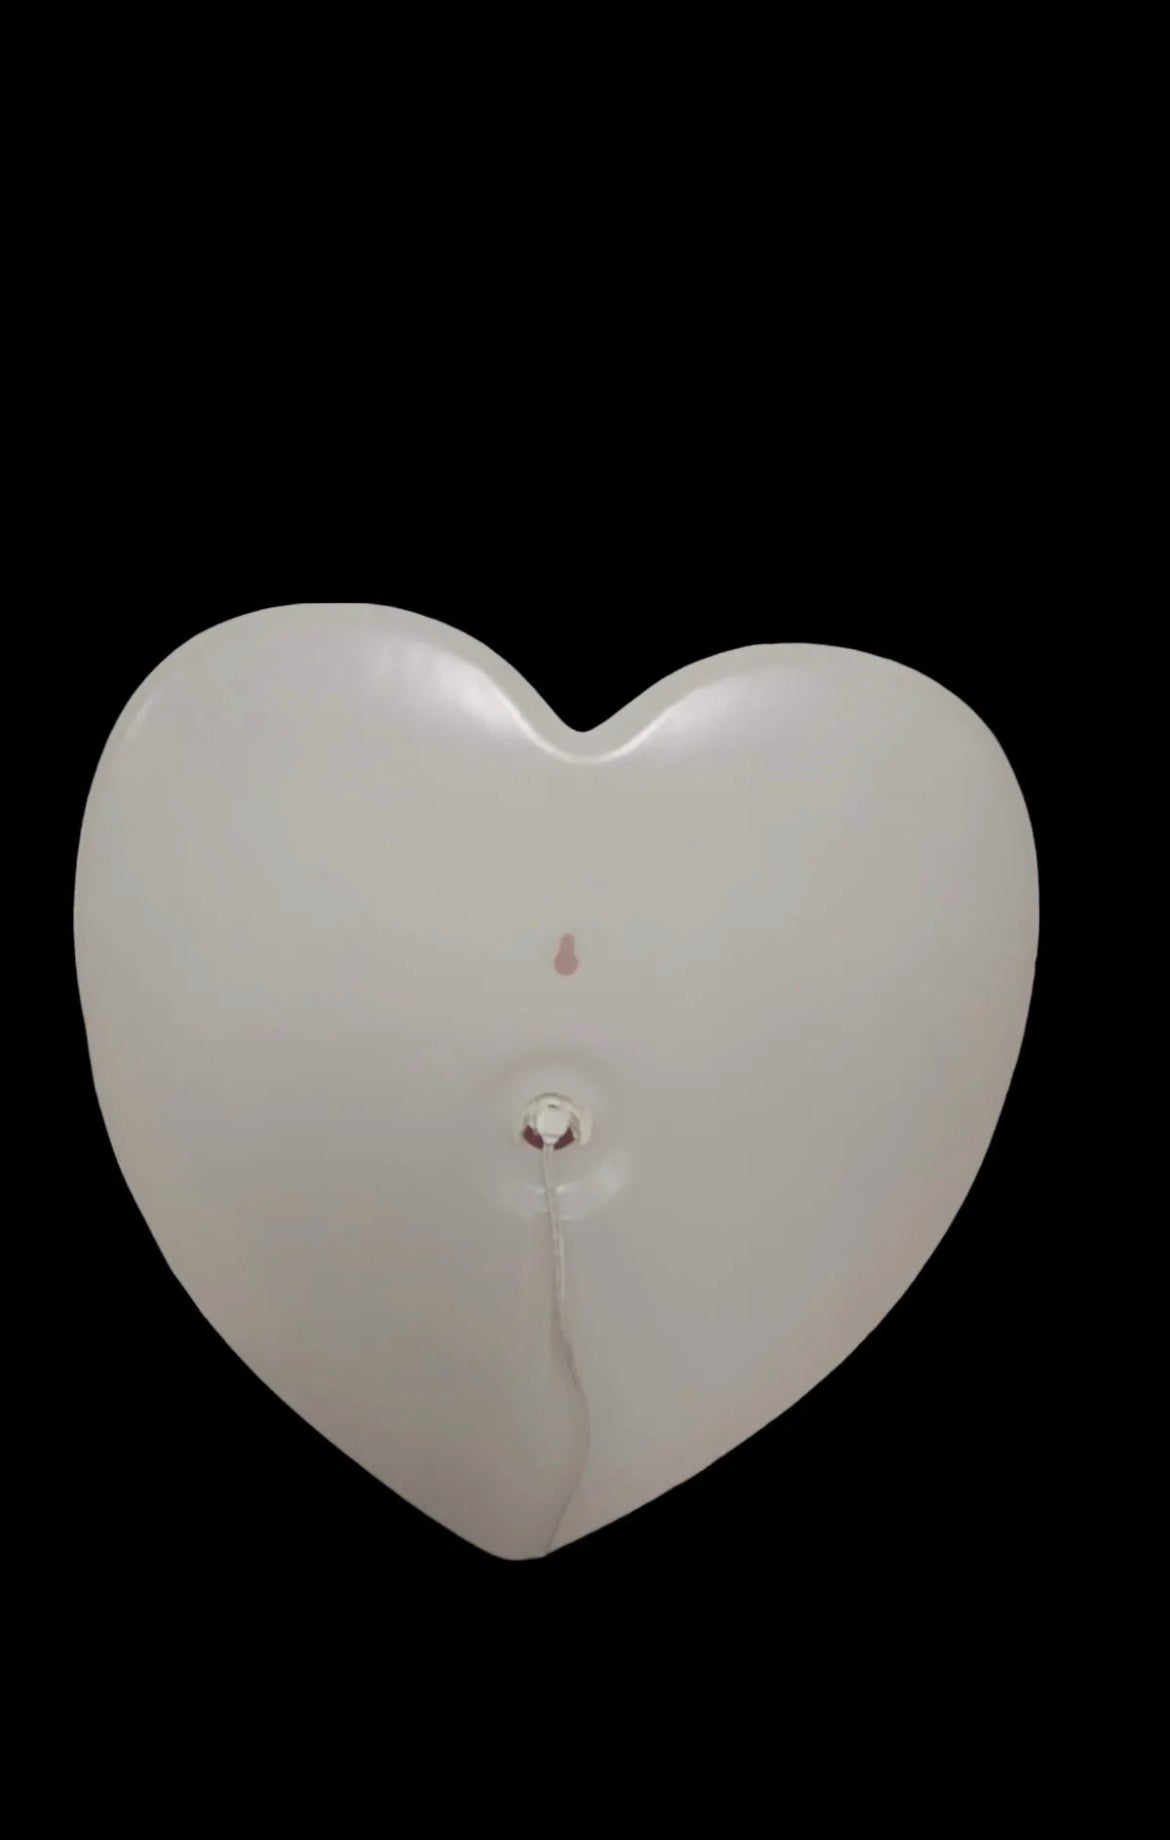 Cupid’s Love Heart Shaped Blow Mold Decoration, Vintage Style Valentine’s Day Blow Mold, 20" White Wall Hanging Seasonal Décor, LED C7 Illumination